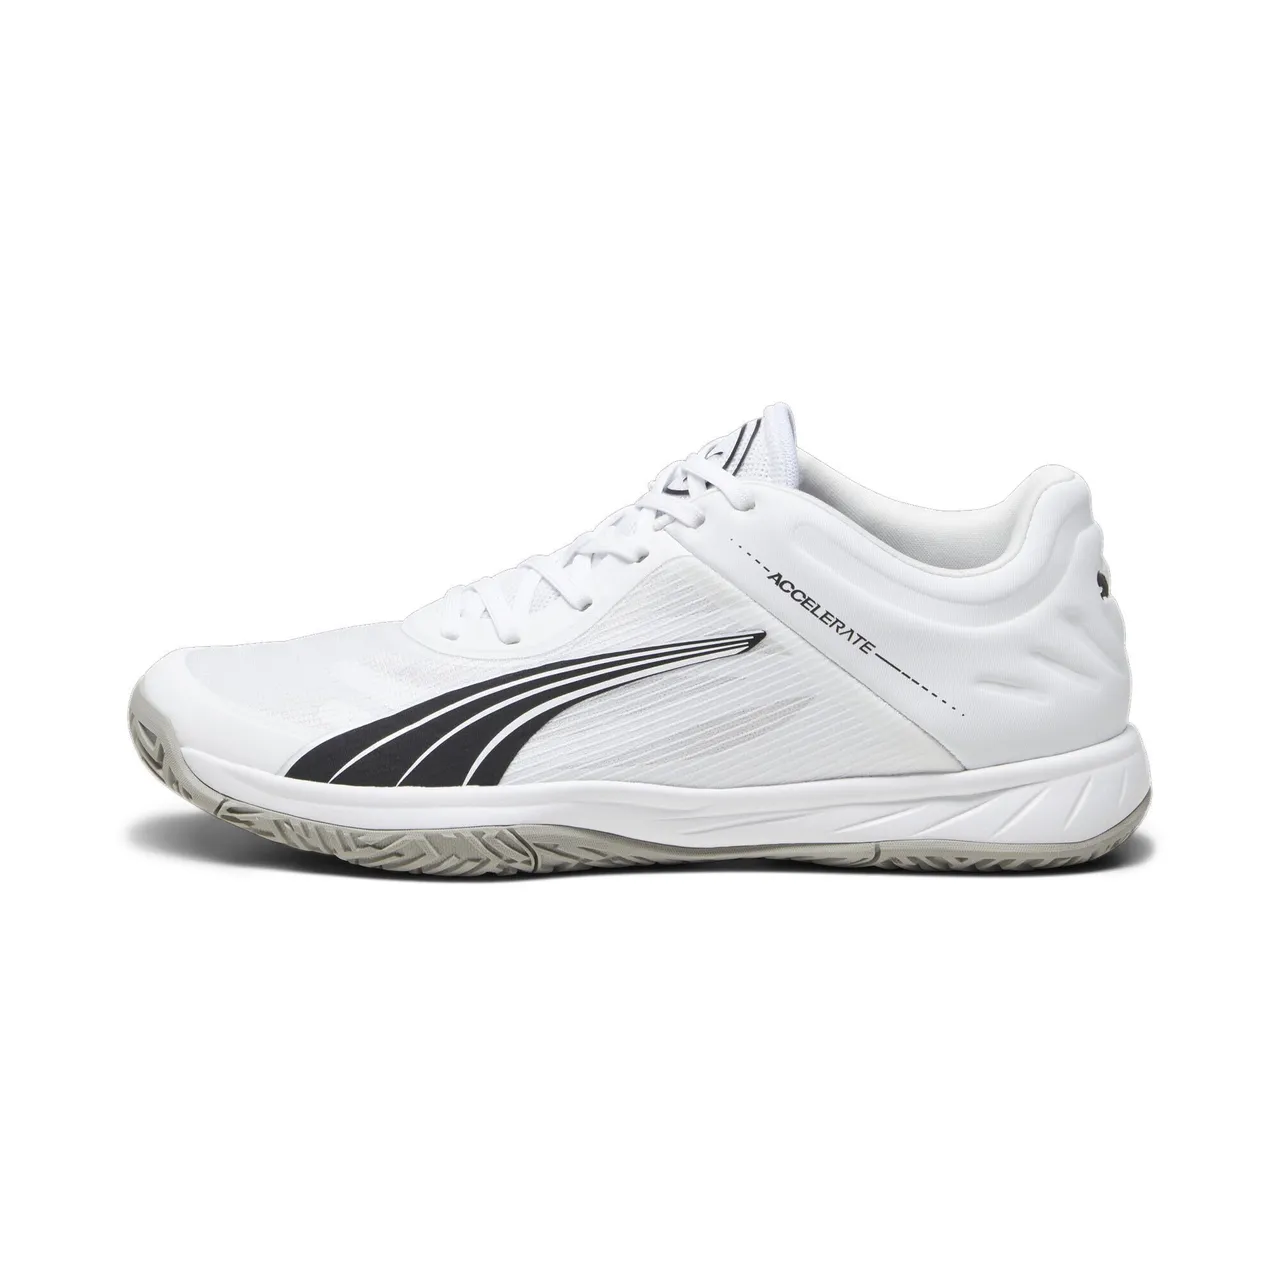 Puma Unisex Adults Accelerate Turbo Indoor Court Shoes